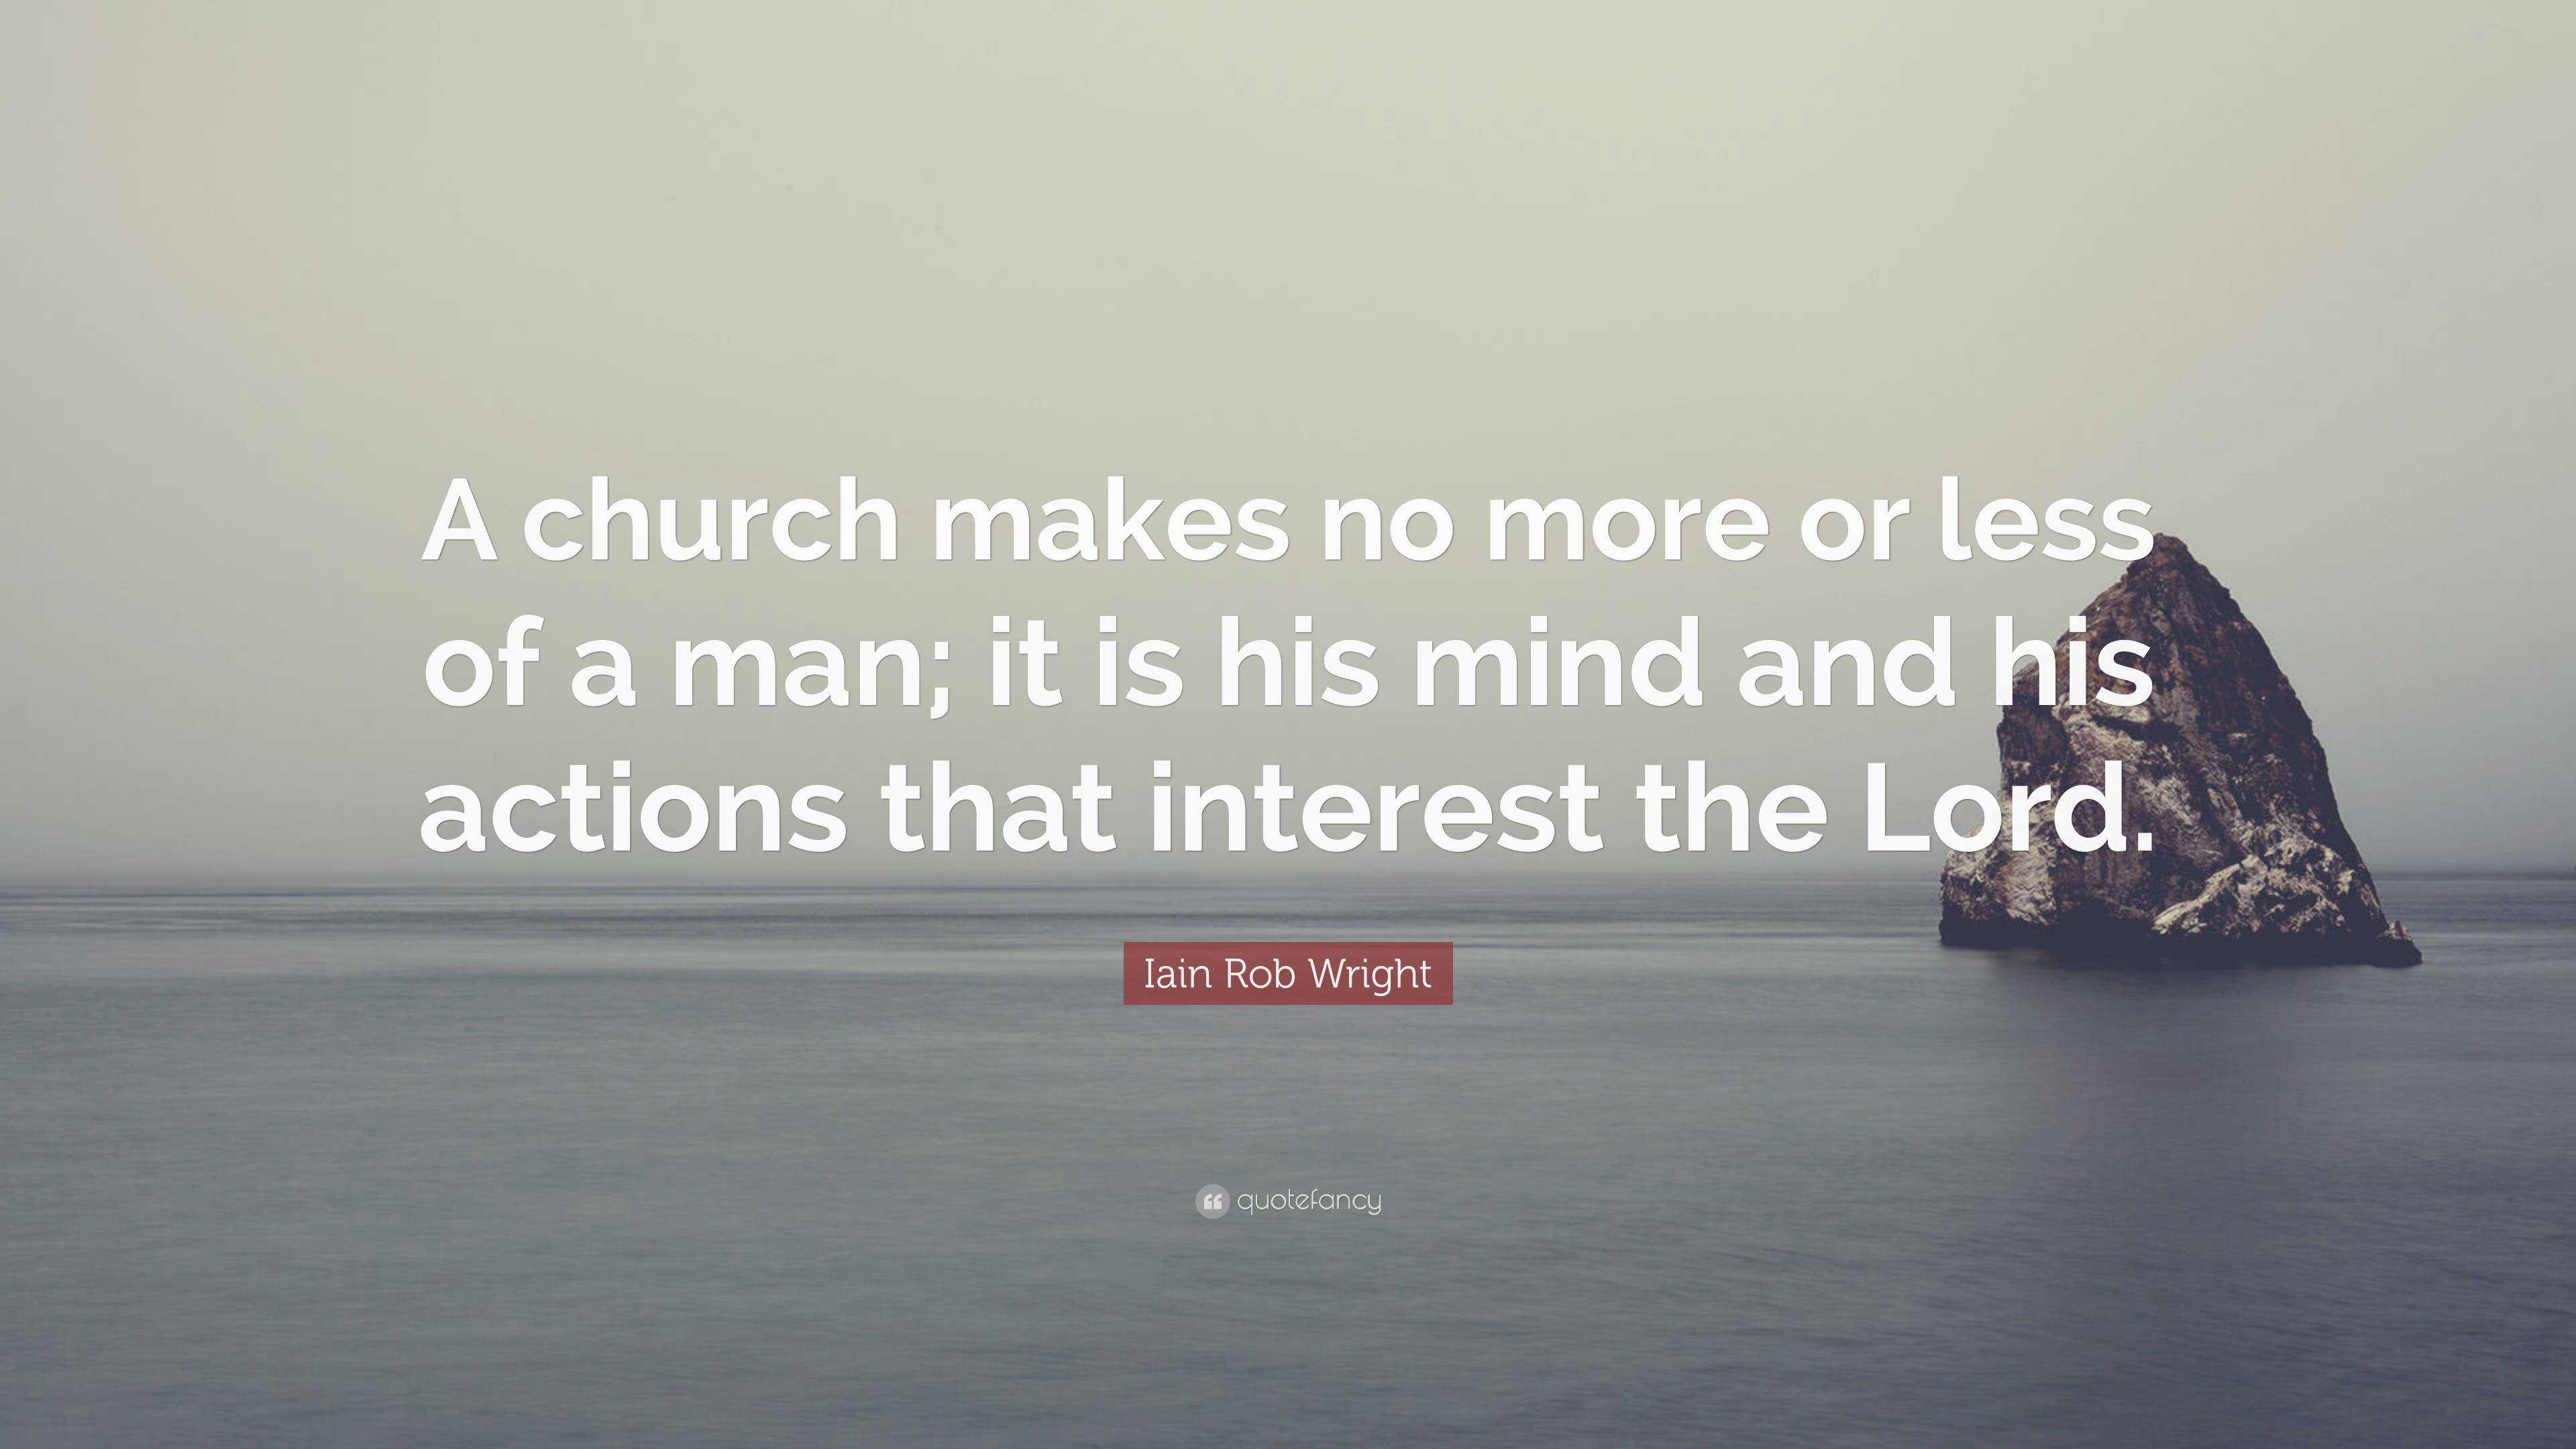 Iain Rob Wright Quote: “A church makes no more or less of a man; it is ...